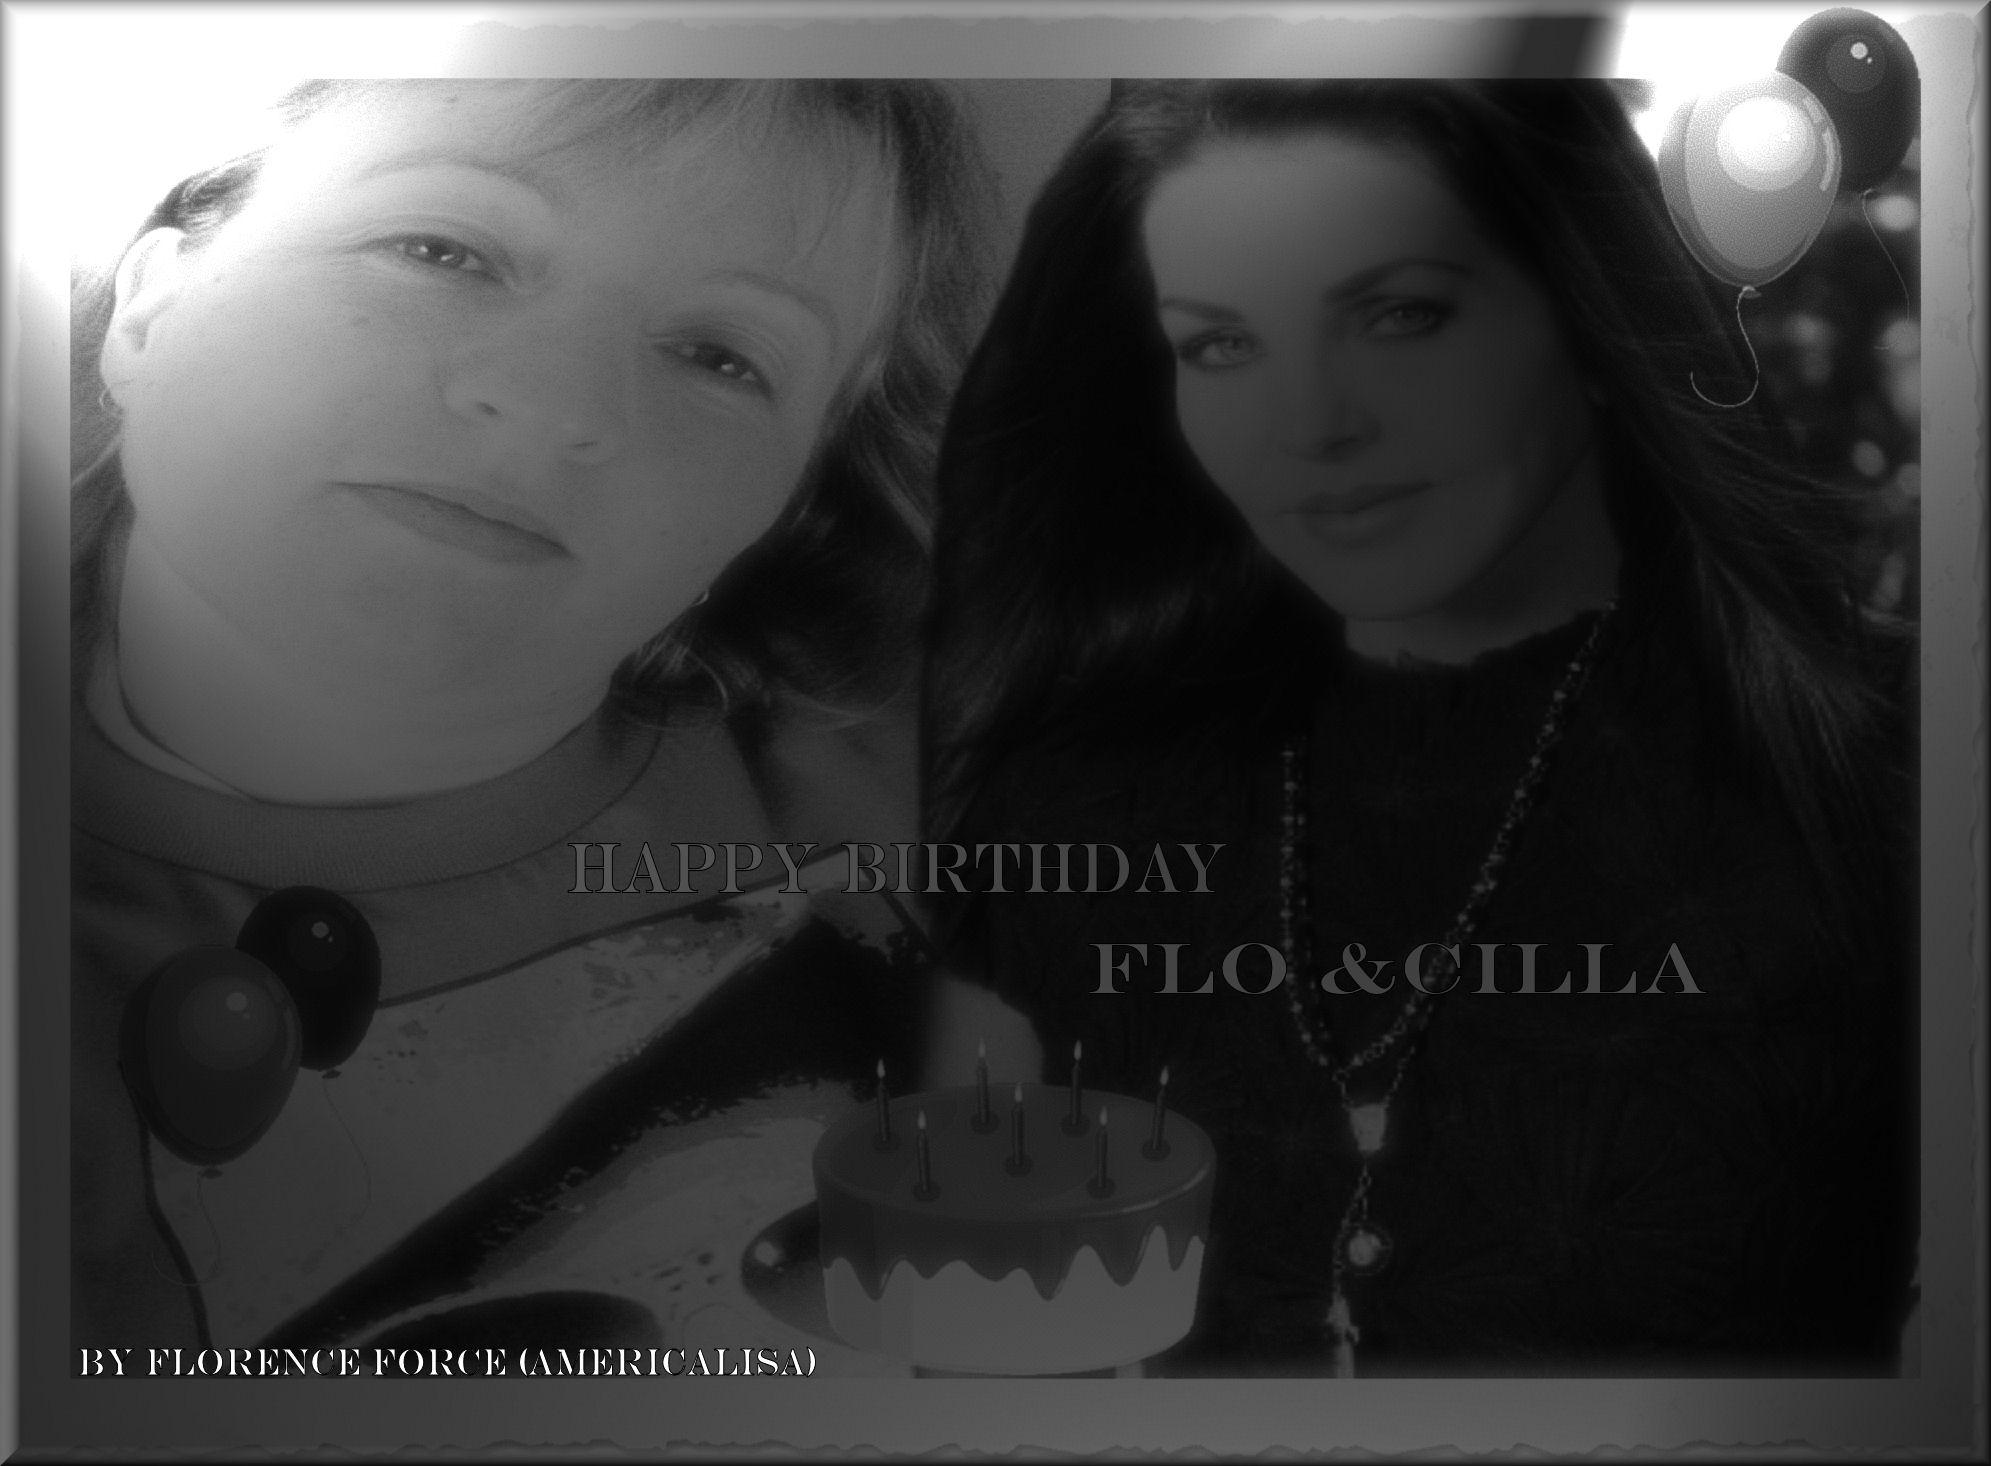 One of my pic in honor of me and Priscilla Presley ;) happy birthday the most wonderful lady Priscilla Presley ;) 